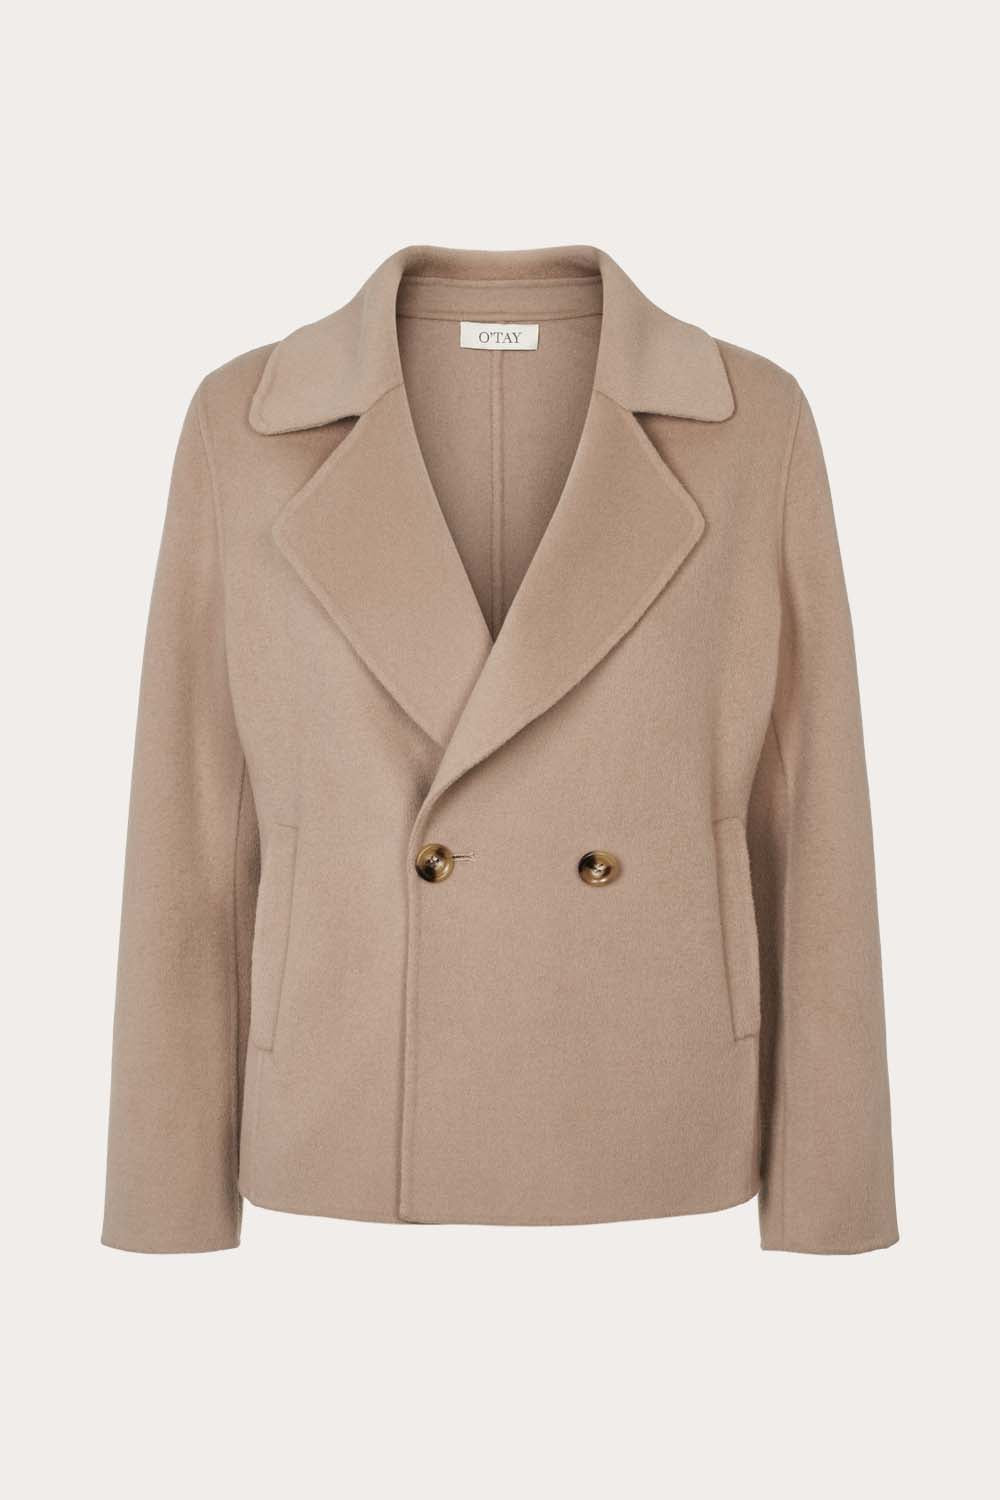 Outerwear | Cashmere coats for women | Luxurious materials – otay.no